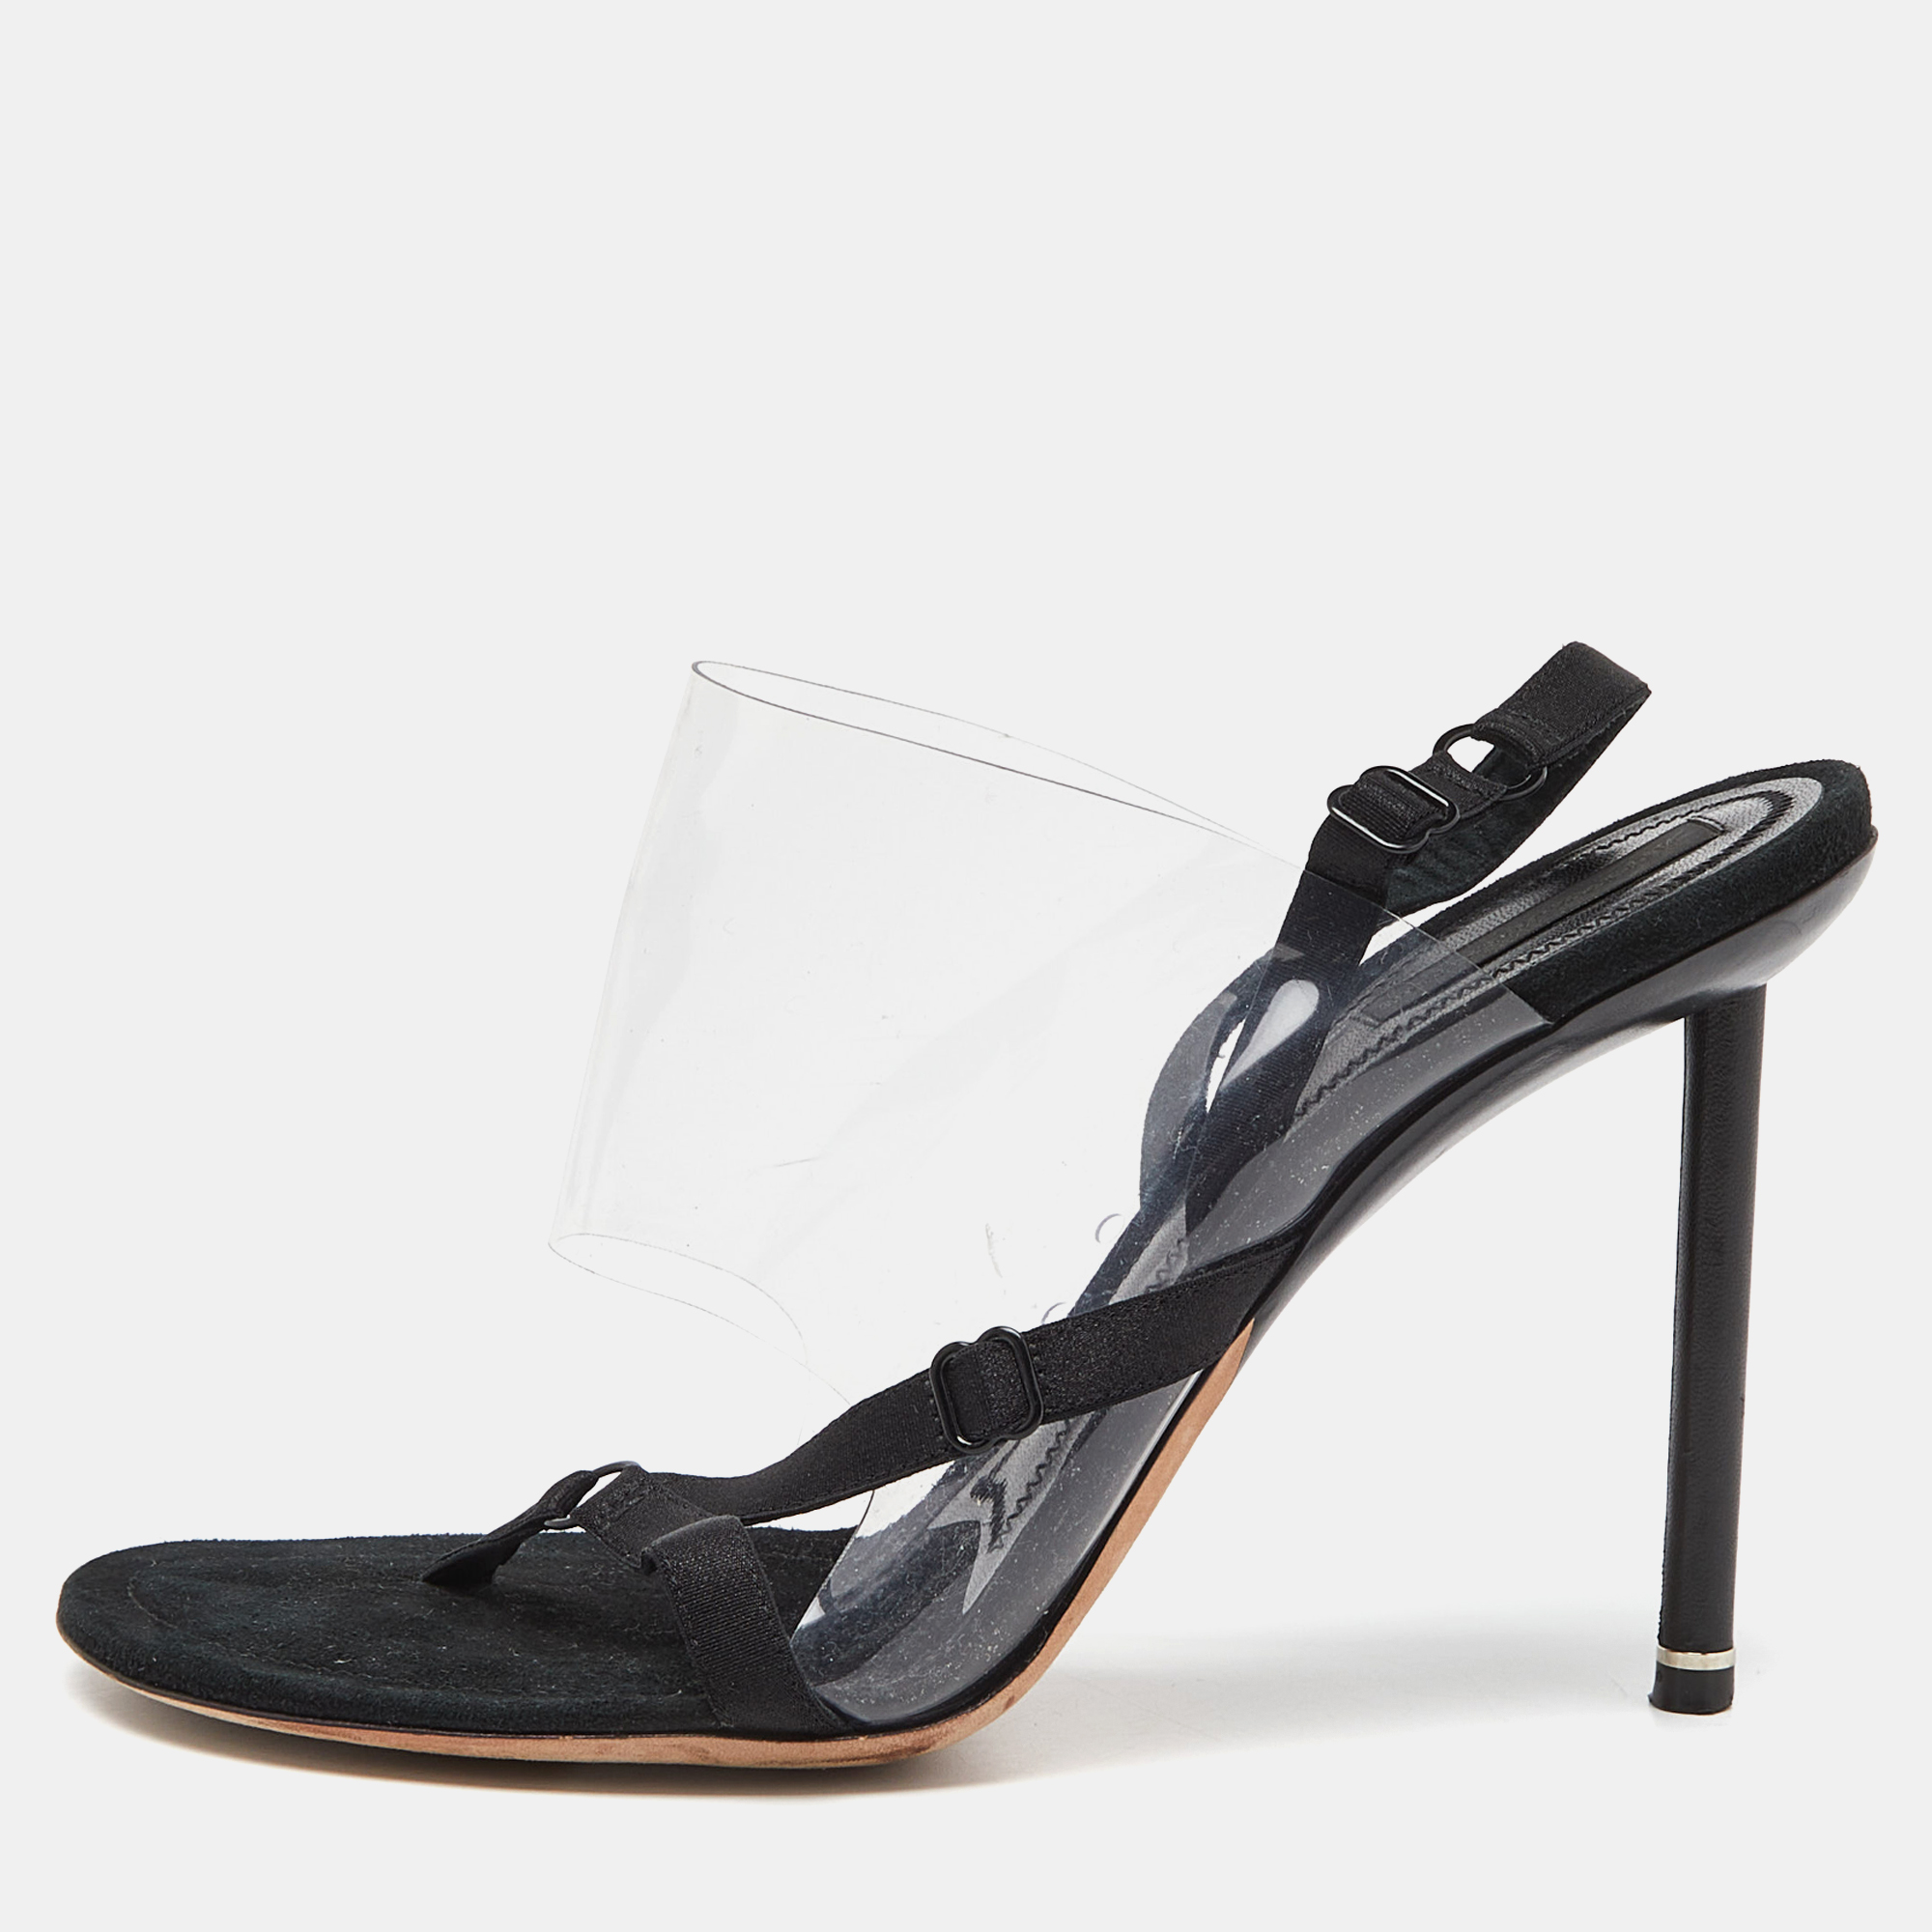 Alexander wang black pvc and suede marlow transparent slingback sandals size 39